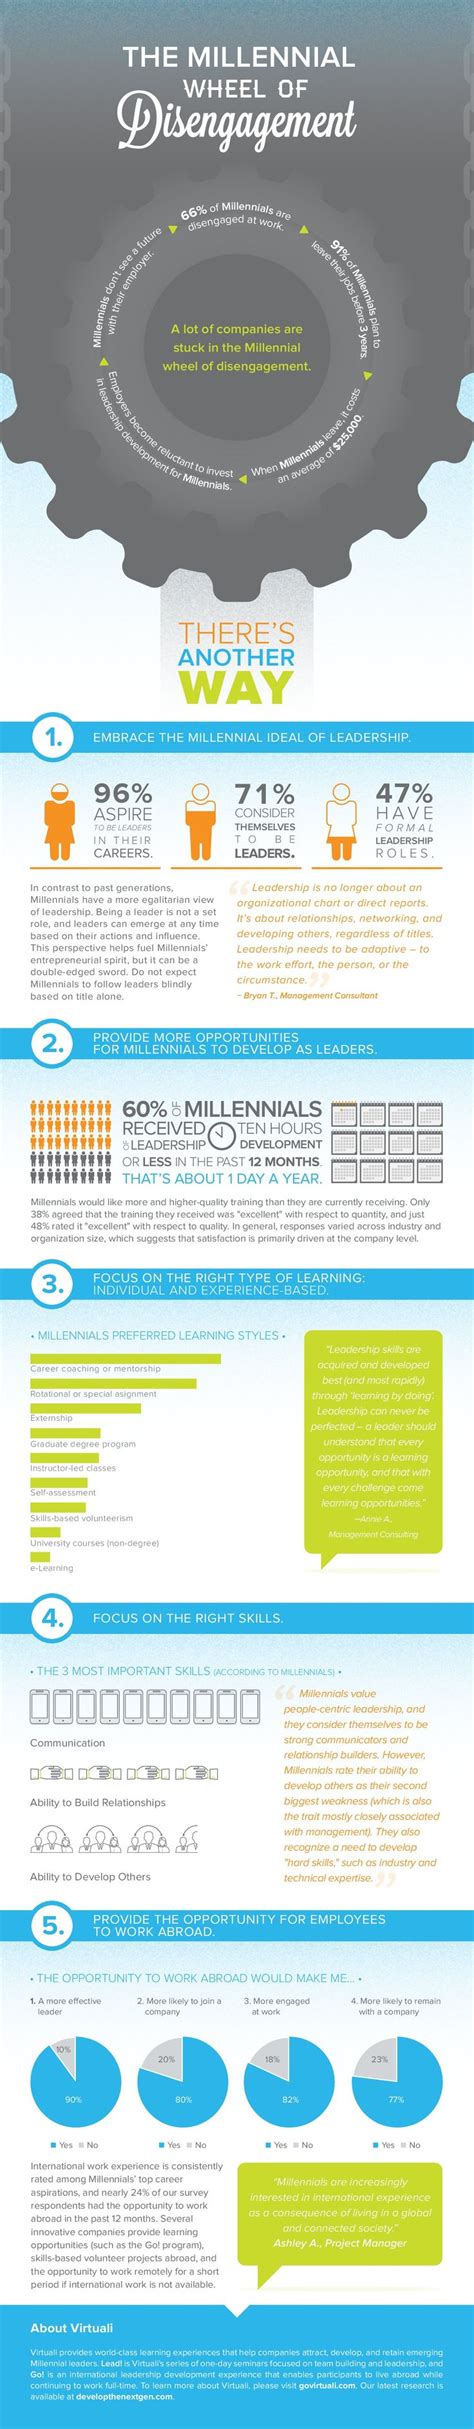 5 Tips For Motivating Millennial Workers Infographic Infographic